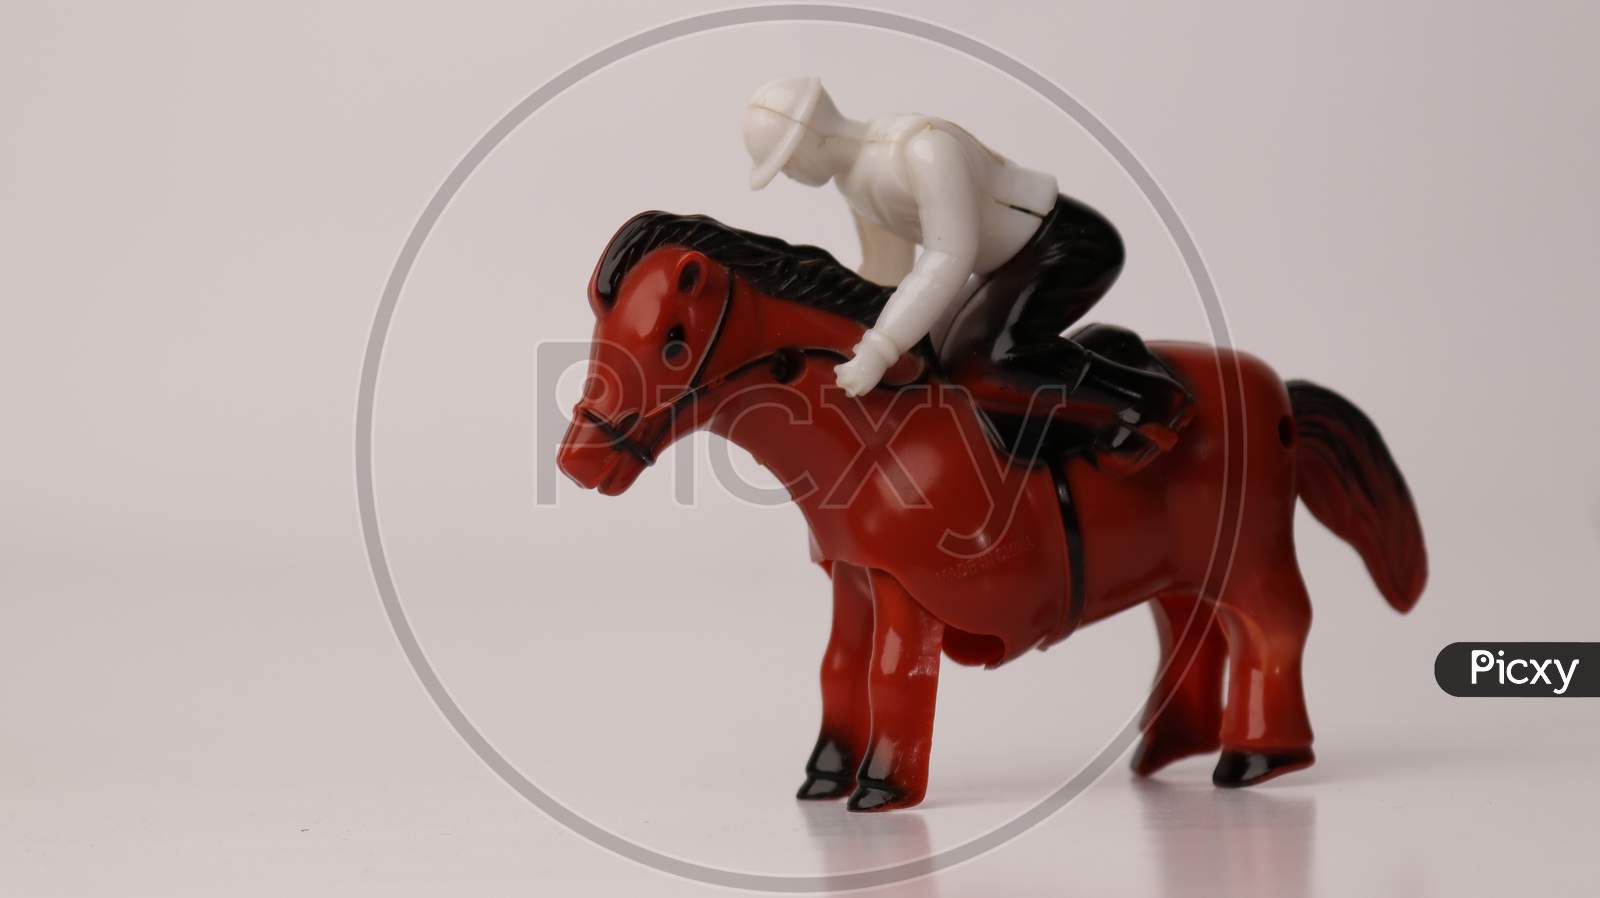 Horse Racing toy on white background